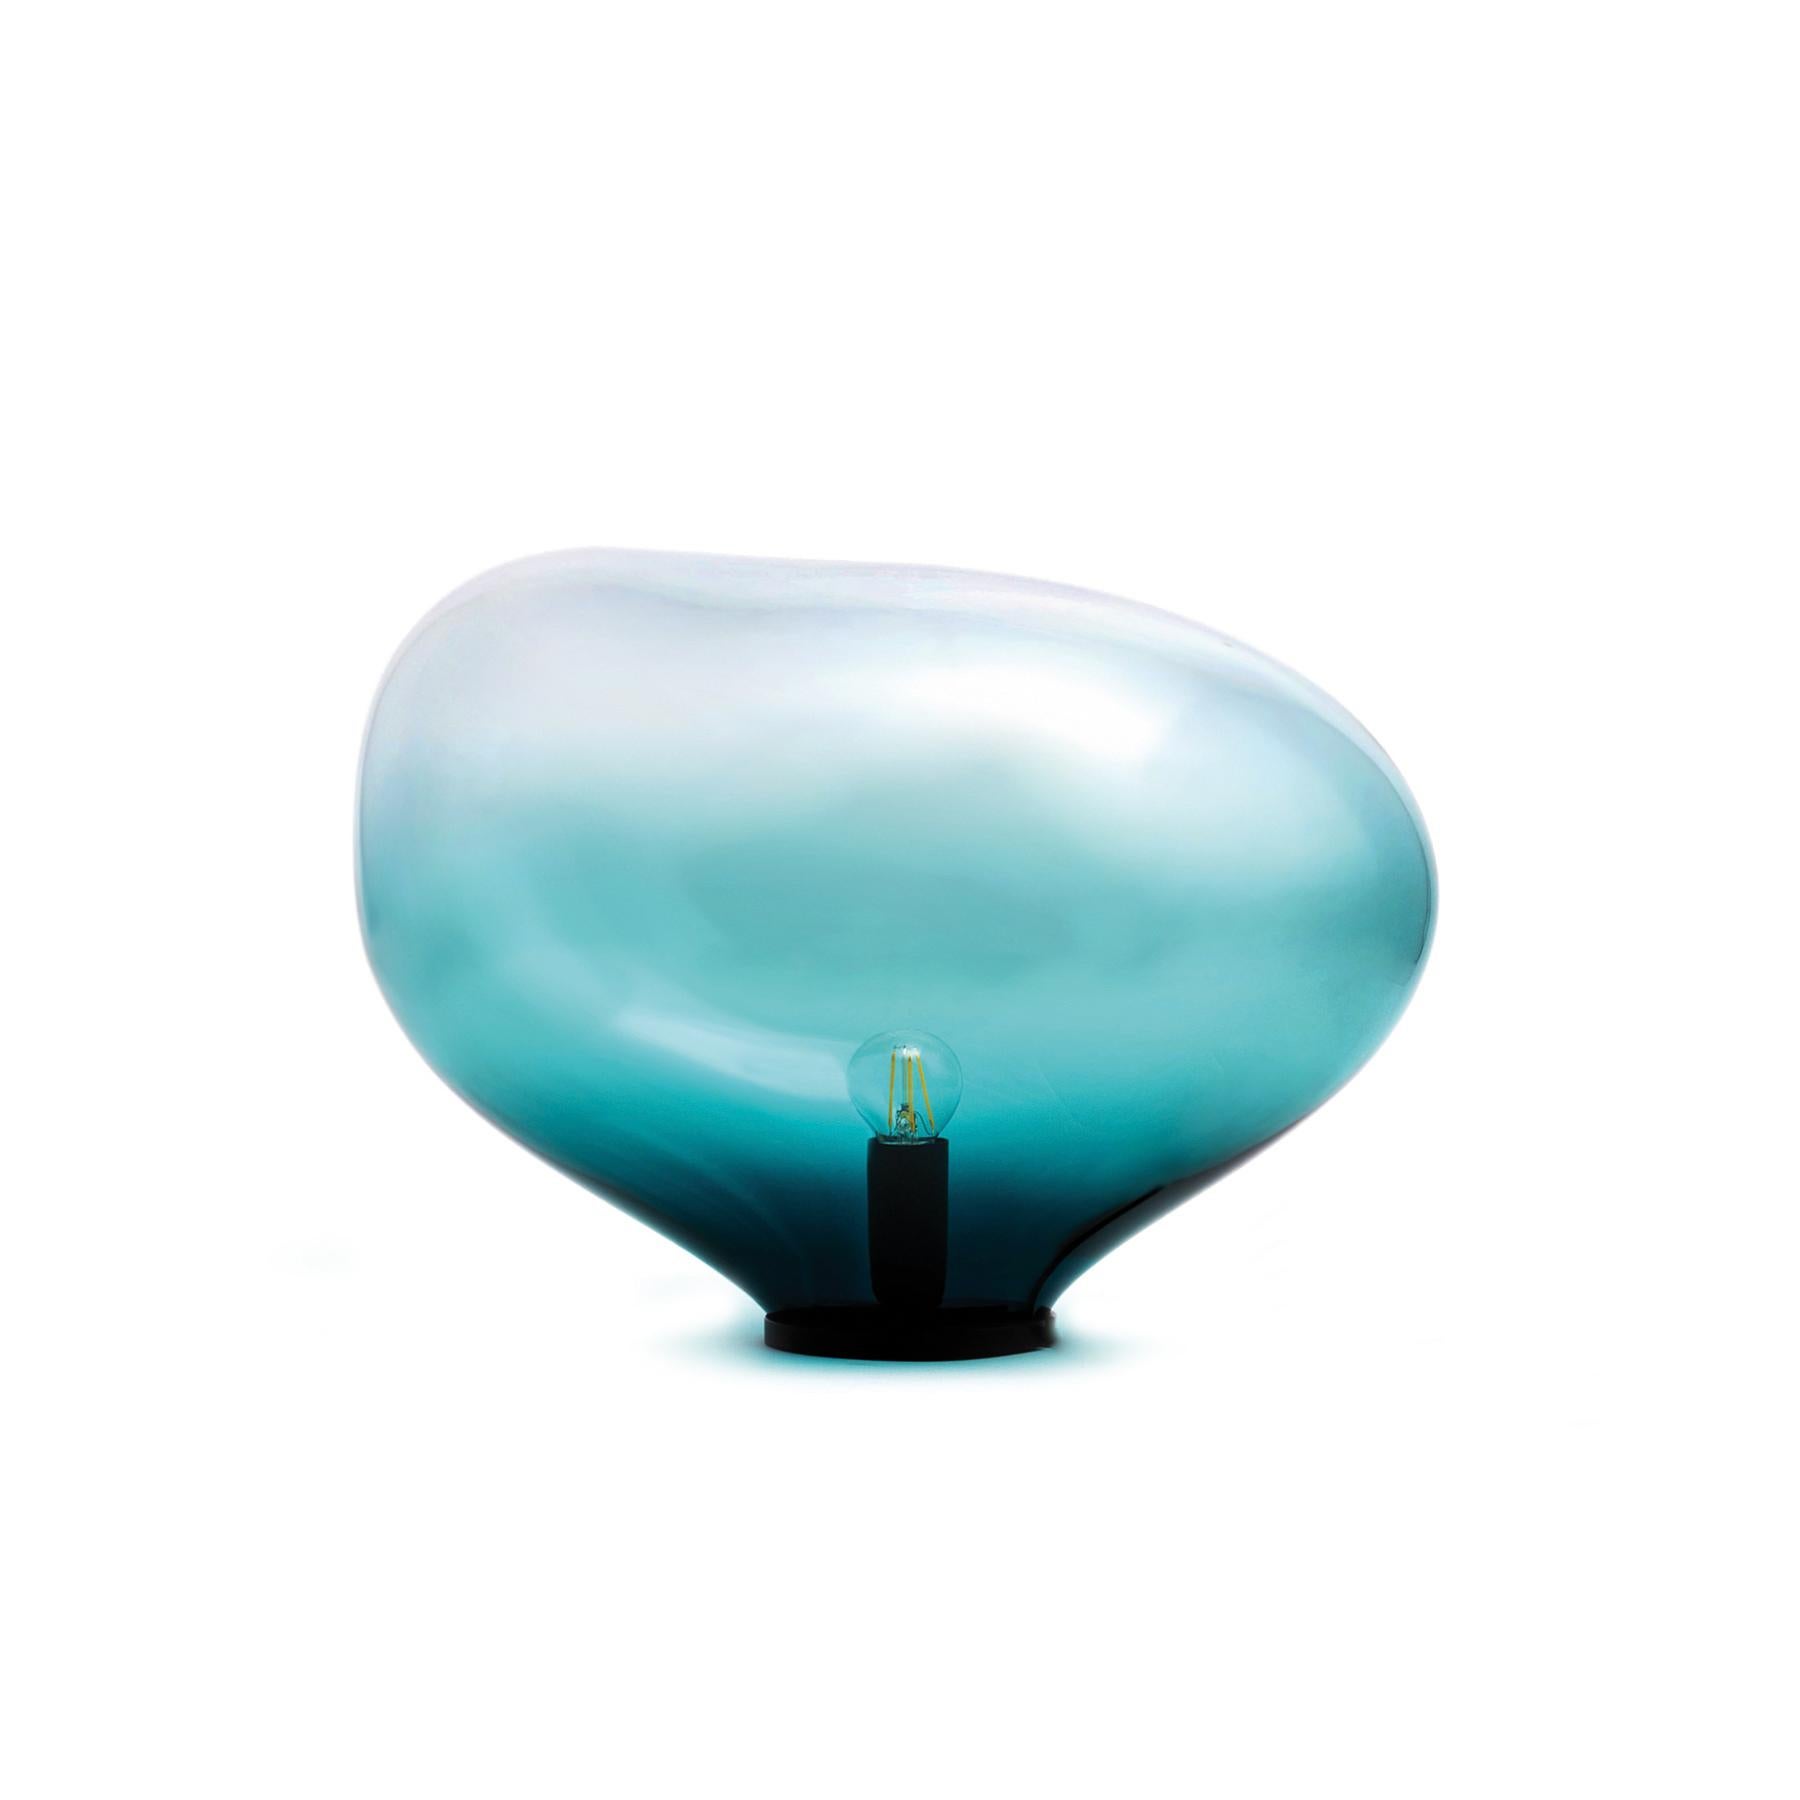 German Sedna Petrol M Table Lamp by ELOA For Sale